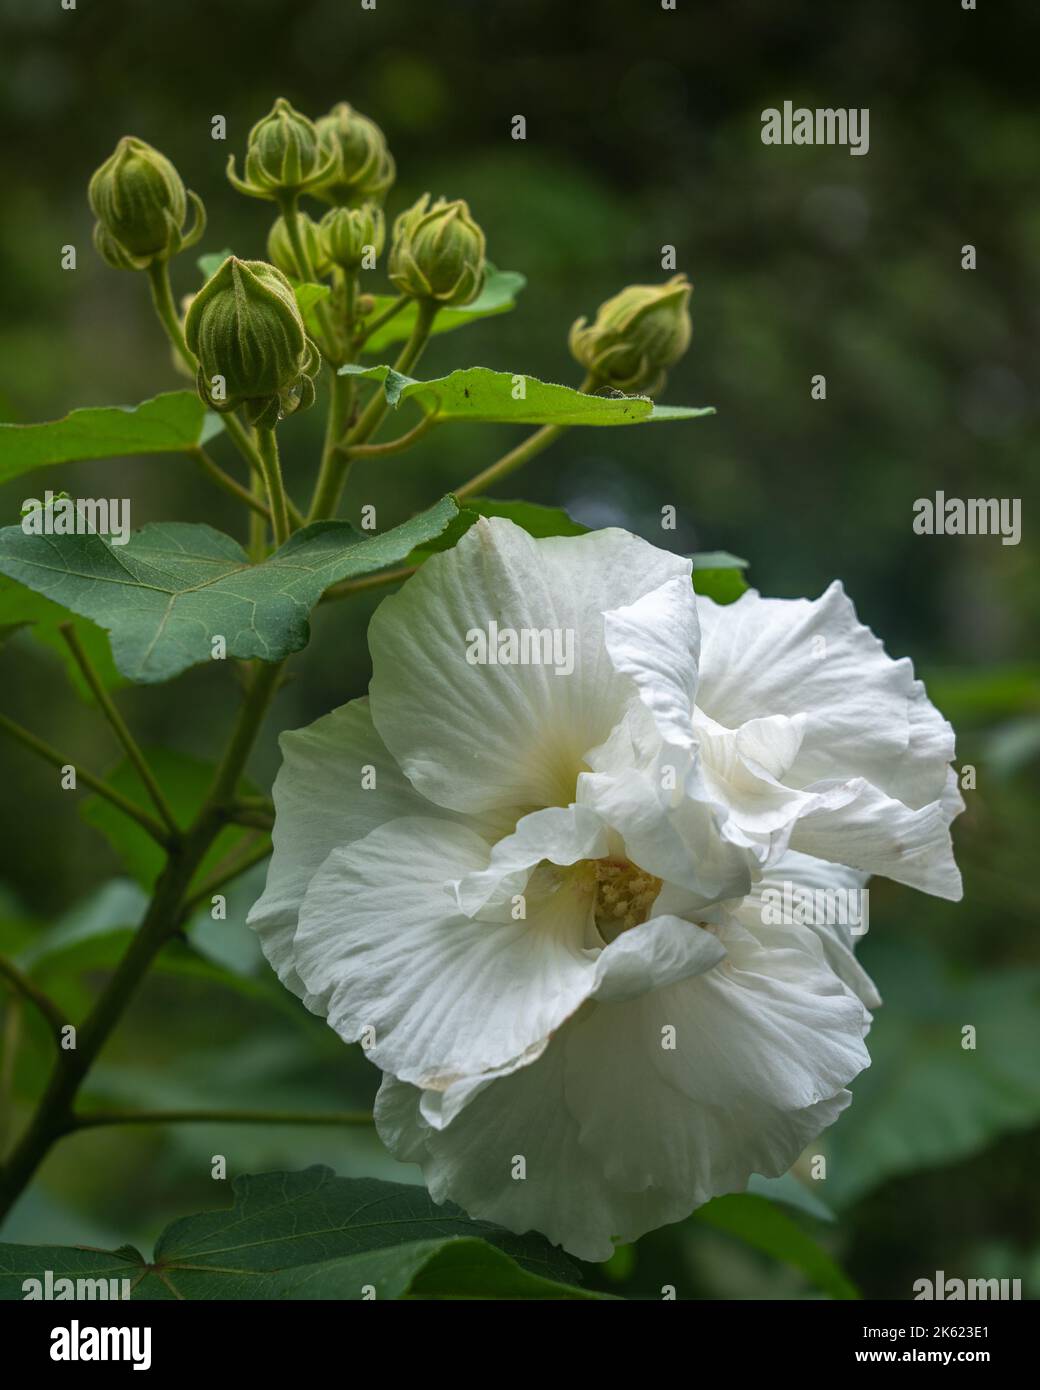 Closeup view of white hibiscus mutabilis aka Confederate rose or Dixie rosemallow flower and buds in outdoor tropical garden on natural background Stock Photo